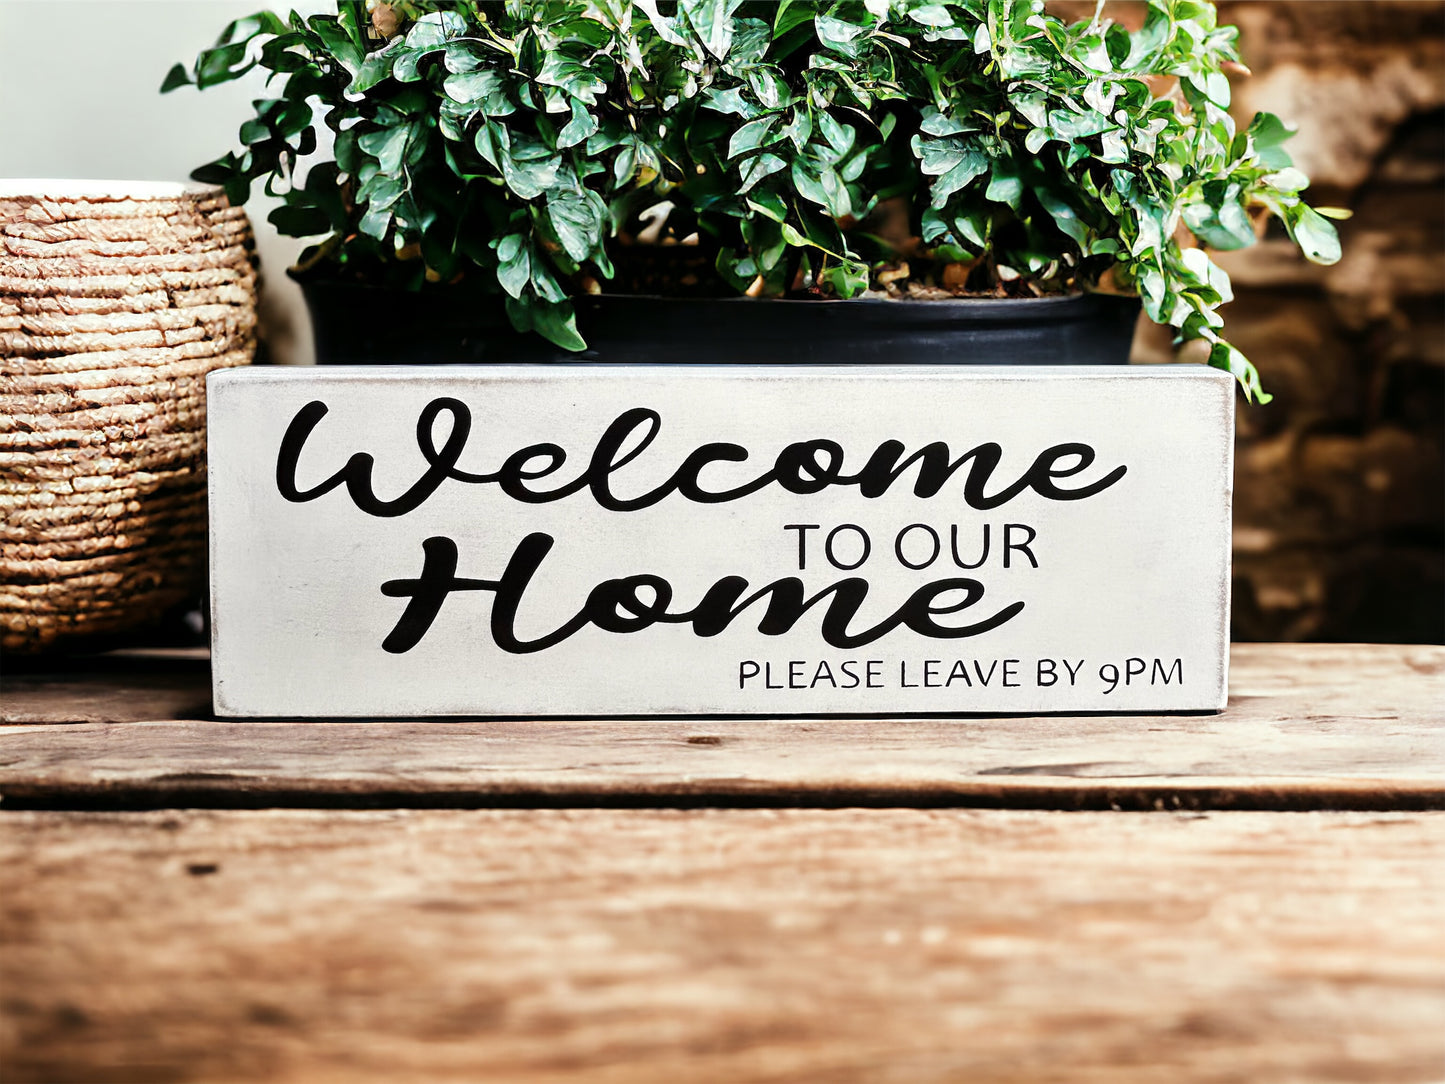 Welcome To Our Home Please Leave by 9pm- Funny Rustic Wood Sign